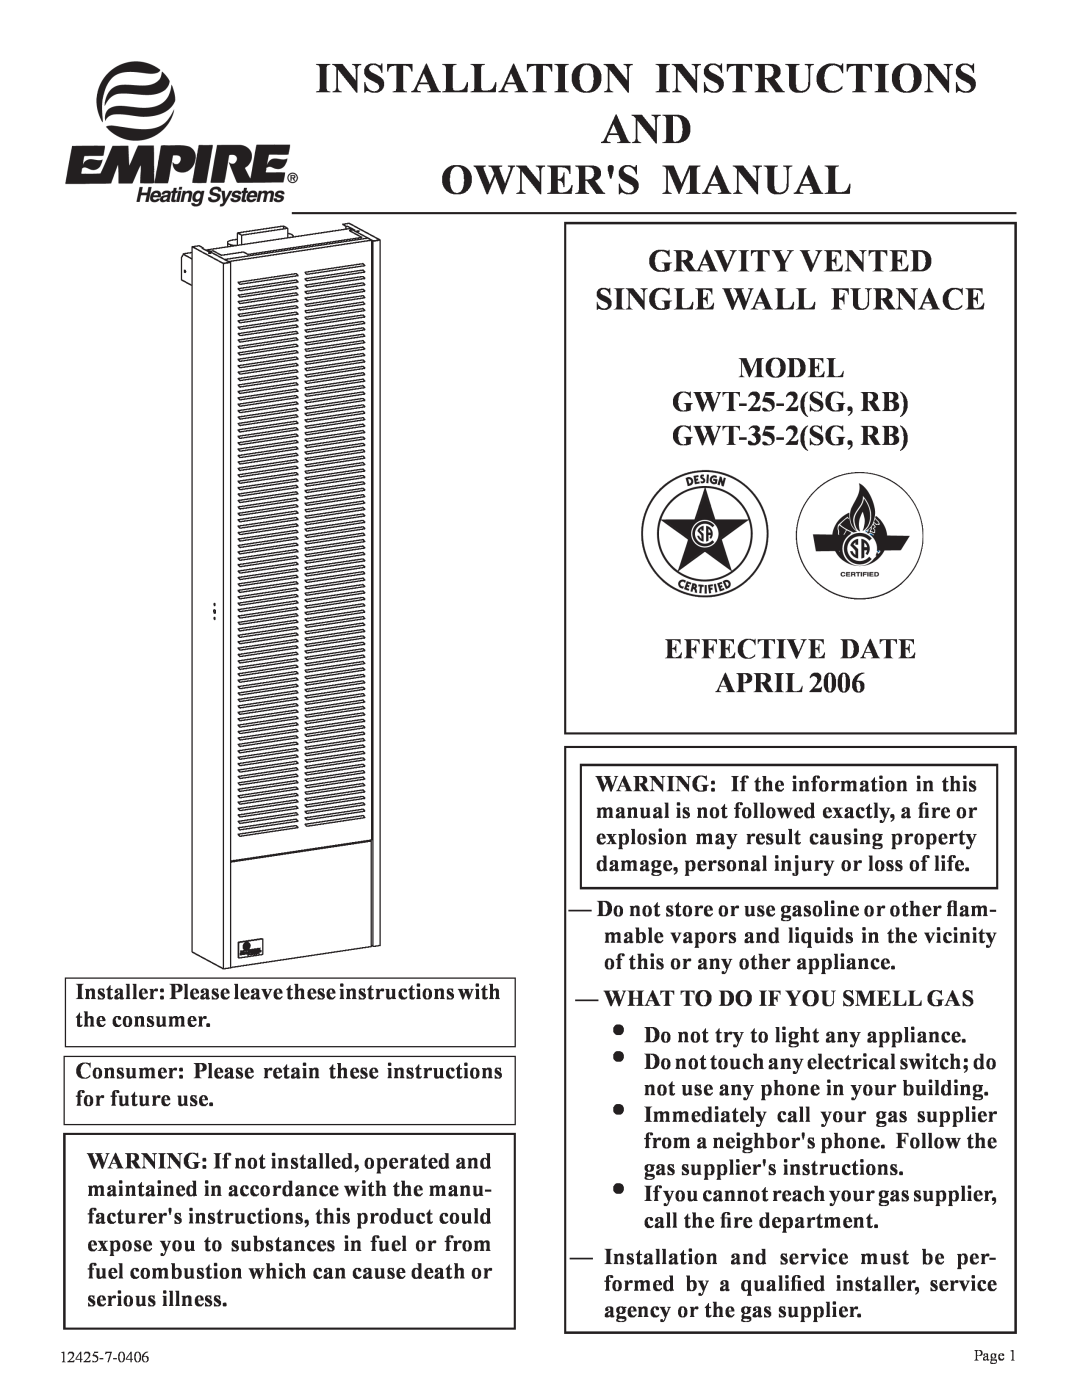 Empire Products RB), GWT-35-2, GWT-25-2 installation instructions Gravity Vented Single Wall Furnace, April 